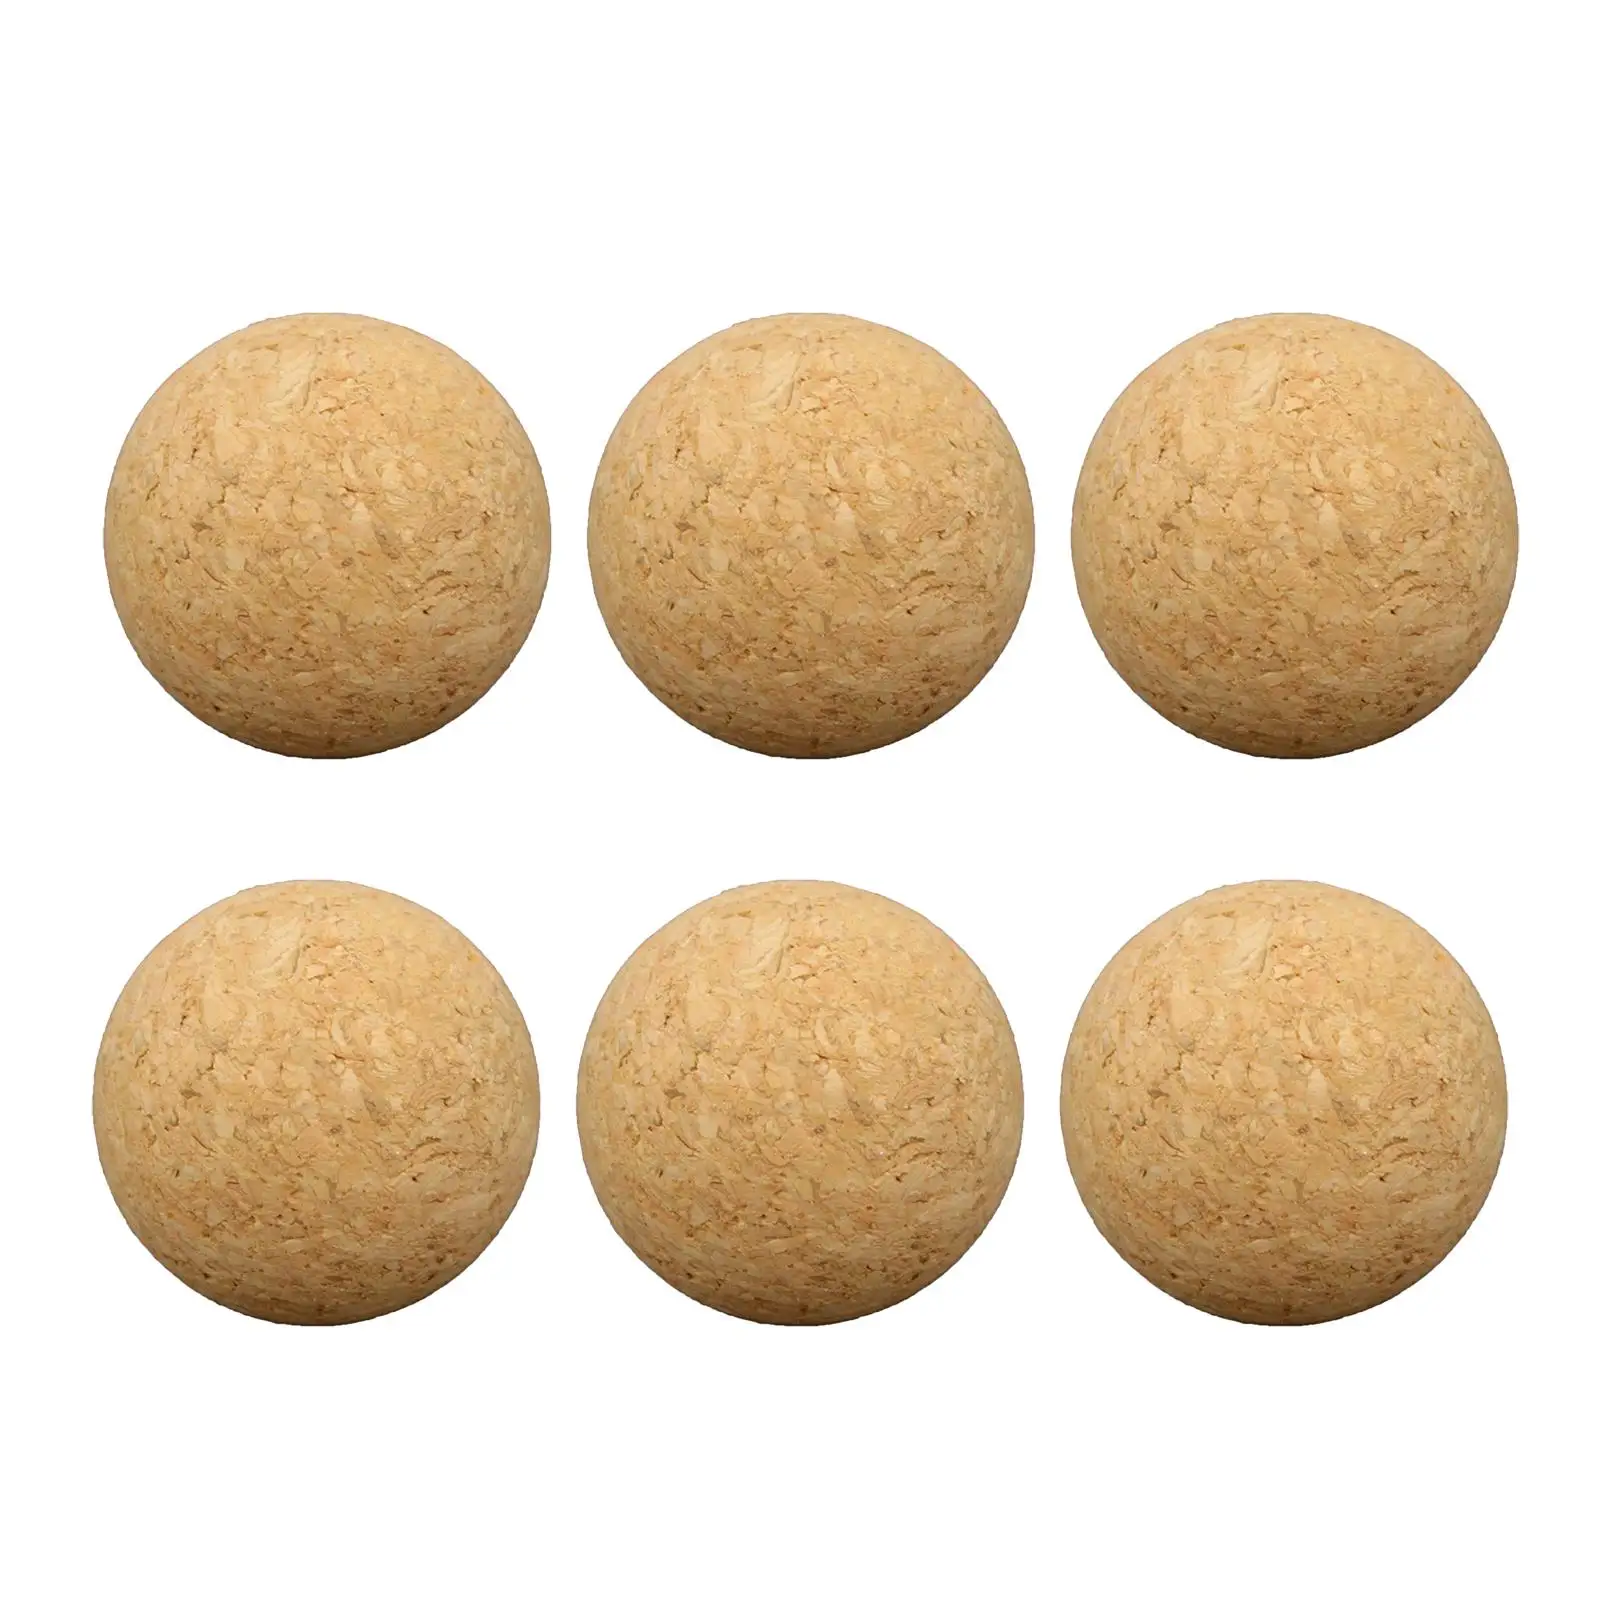 6 Pieces Table Football Cork Table Soccer 36mm Wood Foosball Game Football Machine Replacement Accessories